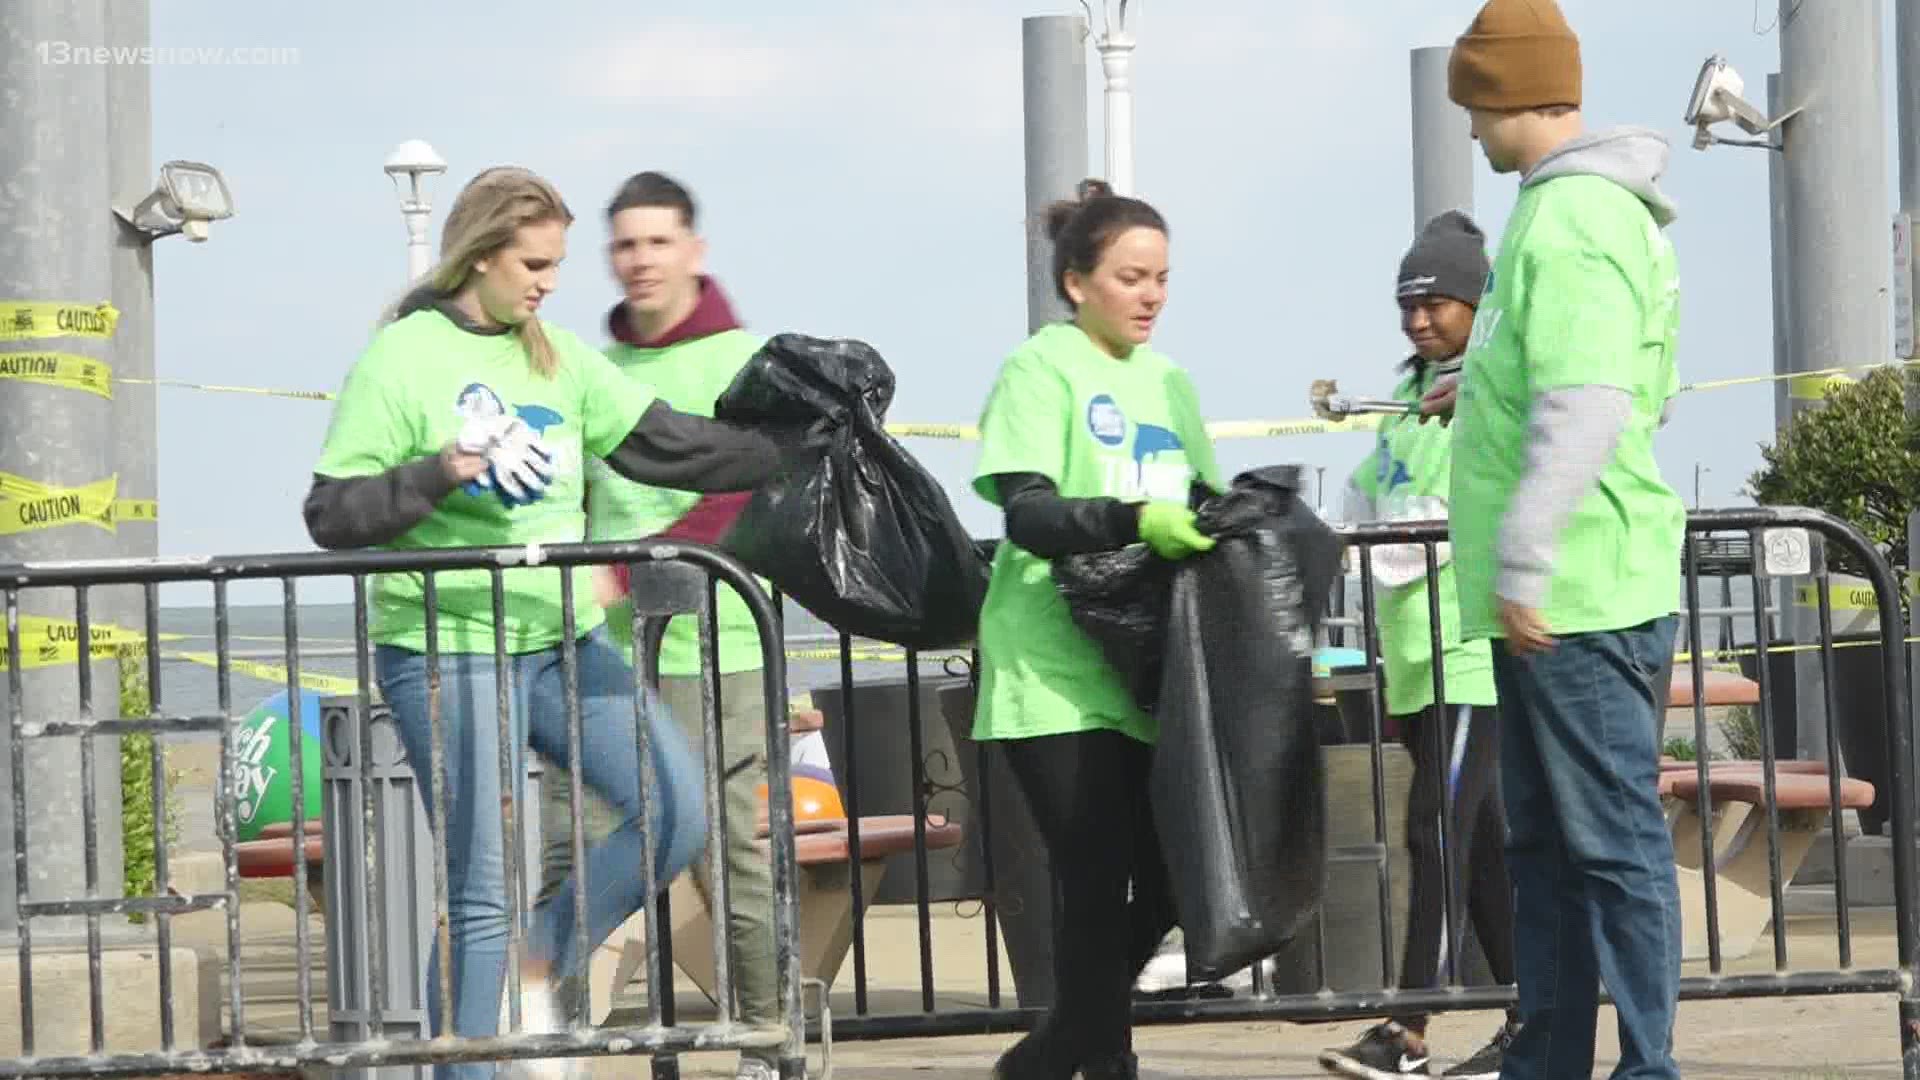 The cleanup is usually held in the fall, but organizers say they wanted to kick start the summer season by having everything beachy clean!